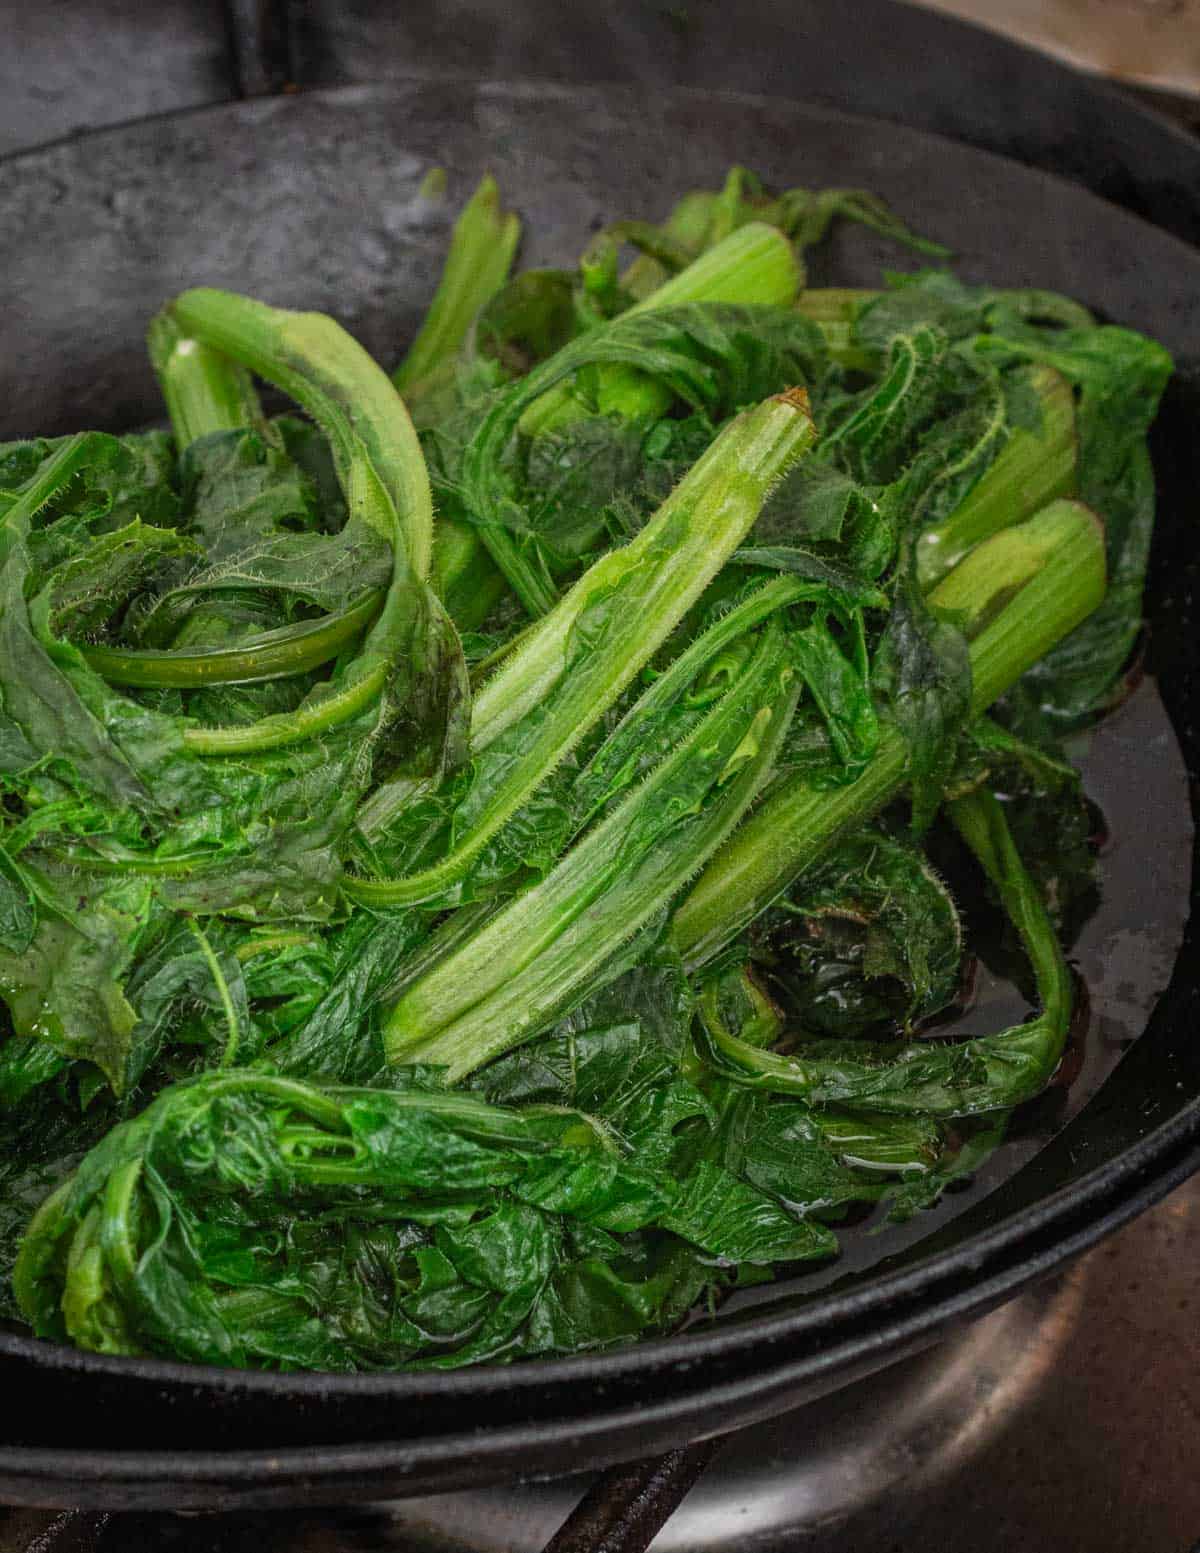 Draining boiled wild lettuce plants in a pan.